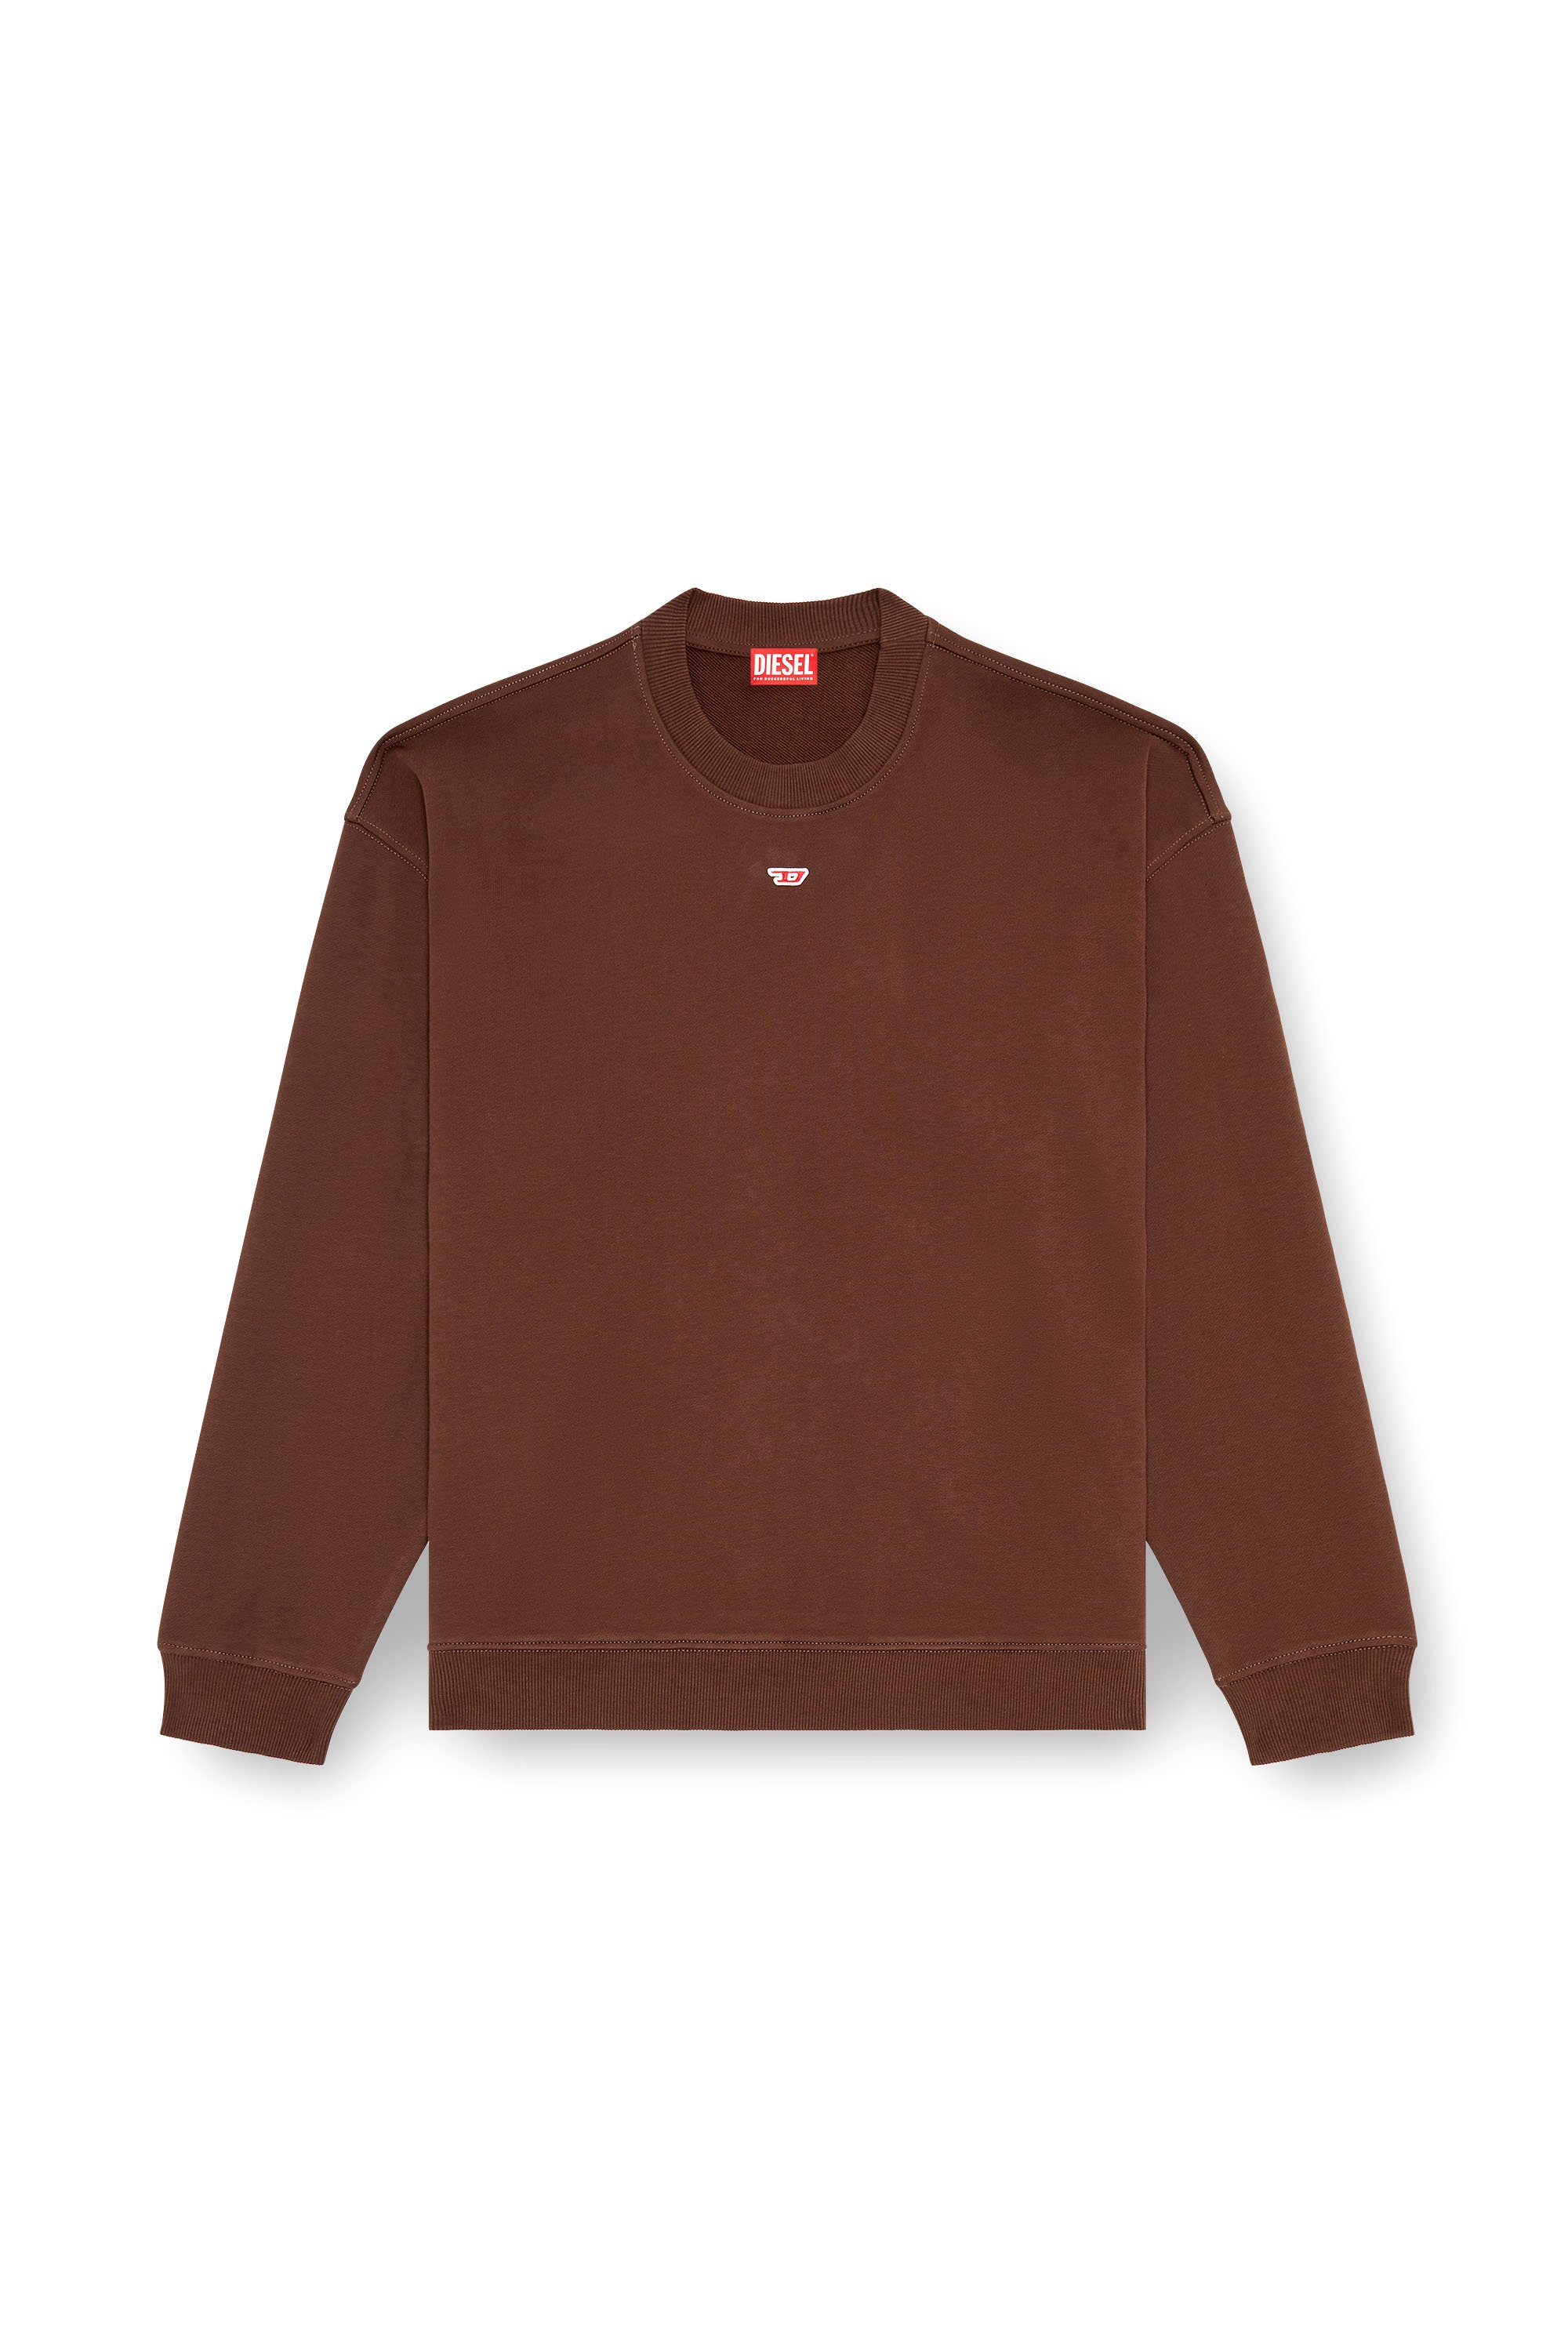 Diesel - S-BOXT-D, Man Sweatshirt with D logo patch in Brown - Image 3